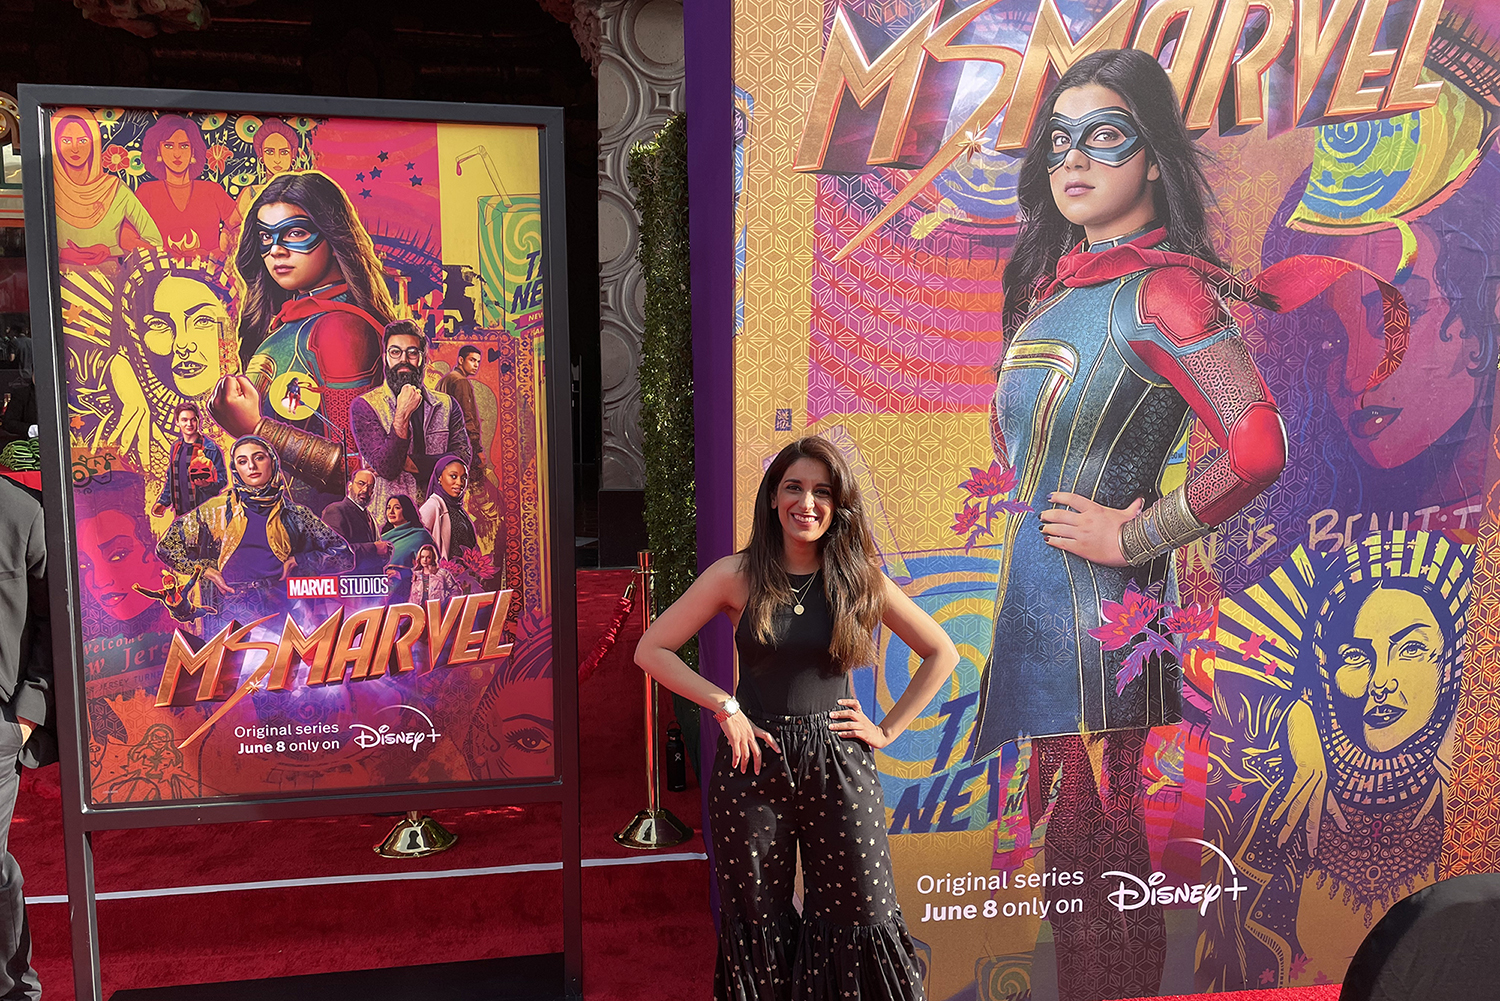 Shehzil Malik stands in front of a Ms. Marvel poster that features a collage of her work.